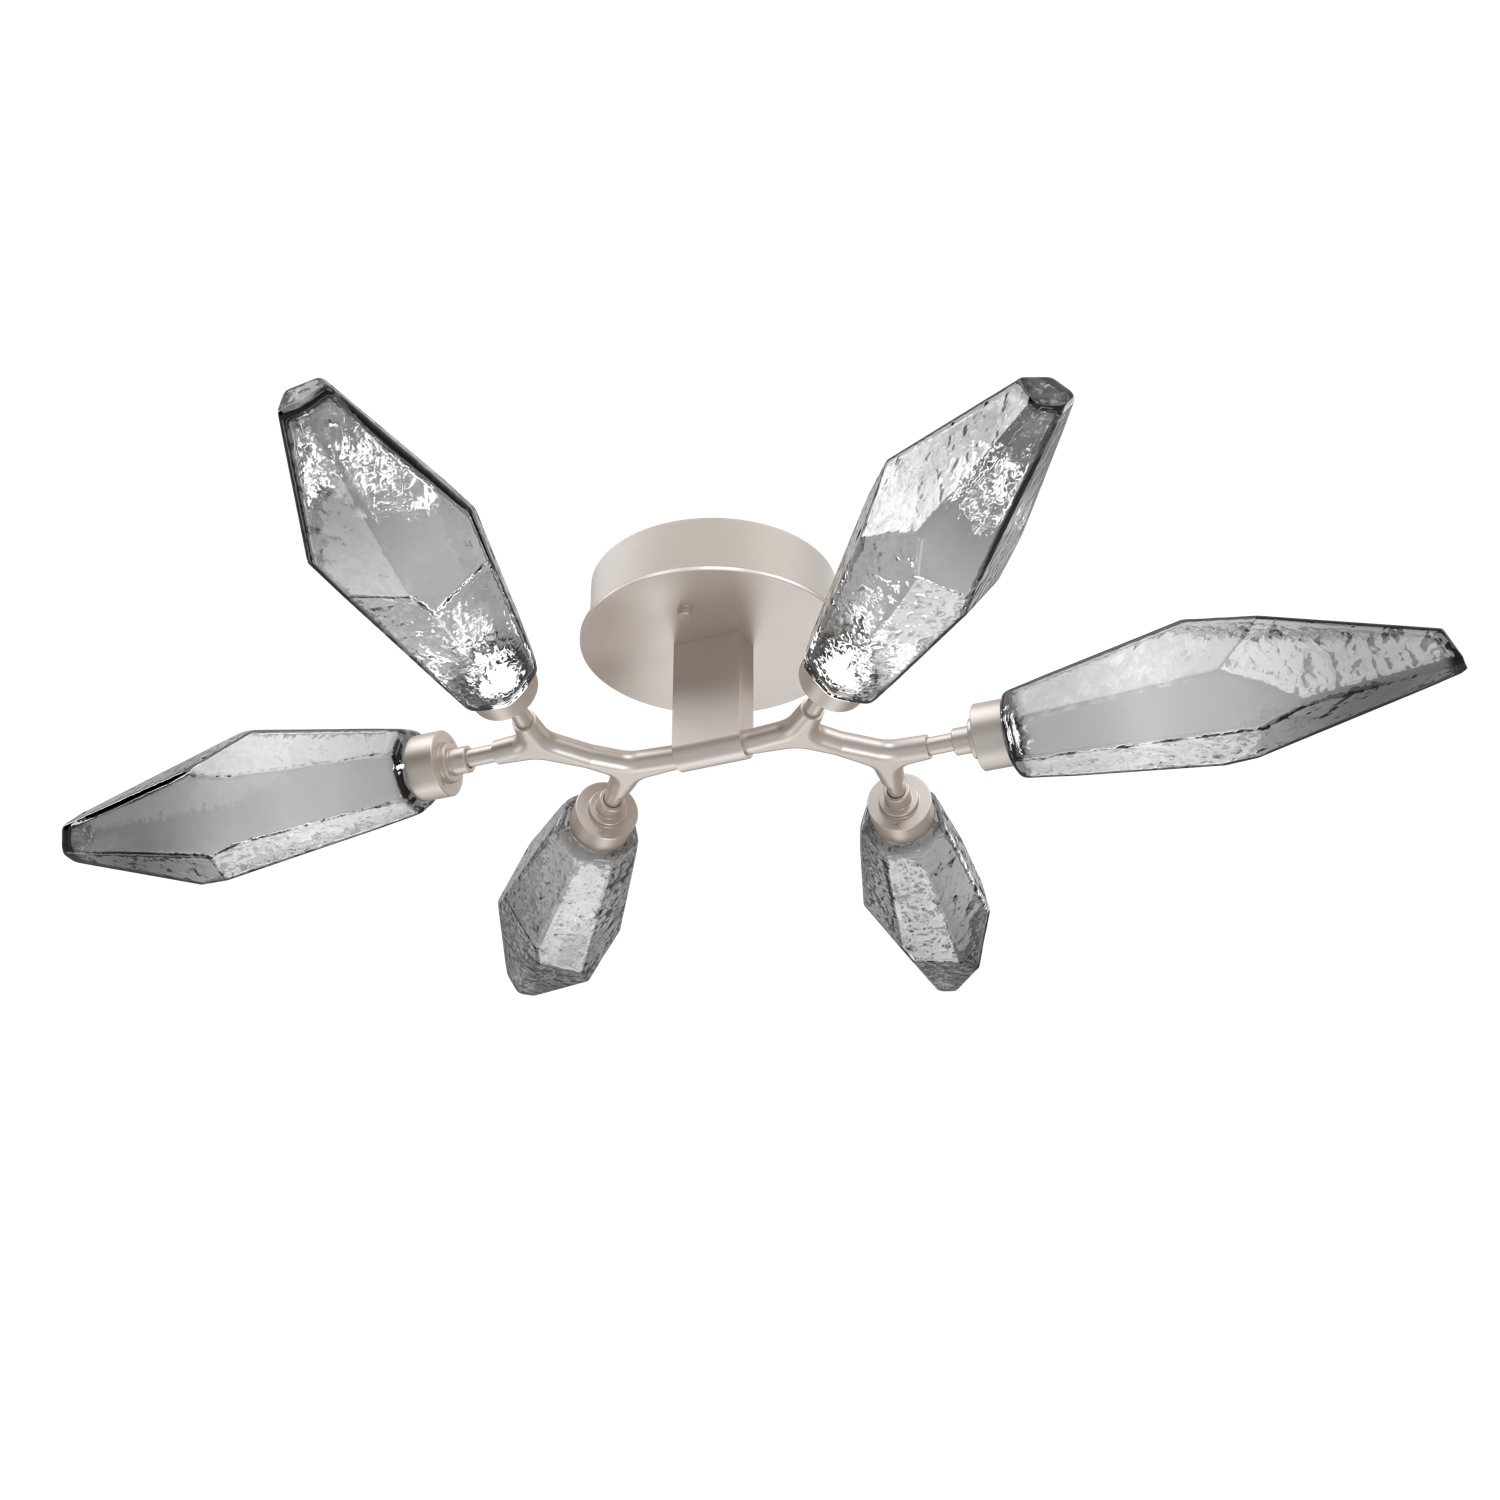 CLB0050-01-BS-CS-Hammerton-Studio-Rock-Crystal-flush-mount-light-with-beige-silver-finish-and-chilled-smoke-glass-shades-and-LED-lamping